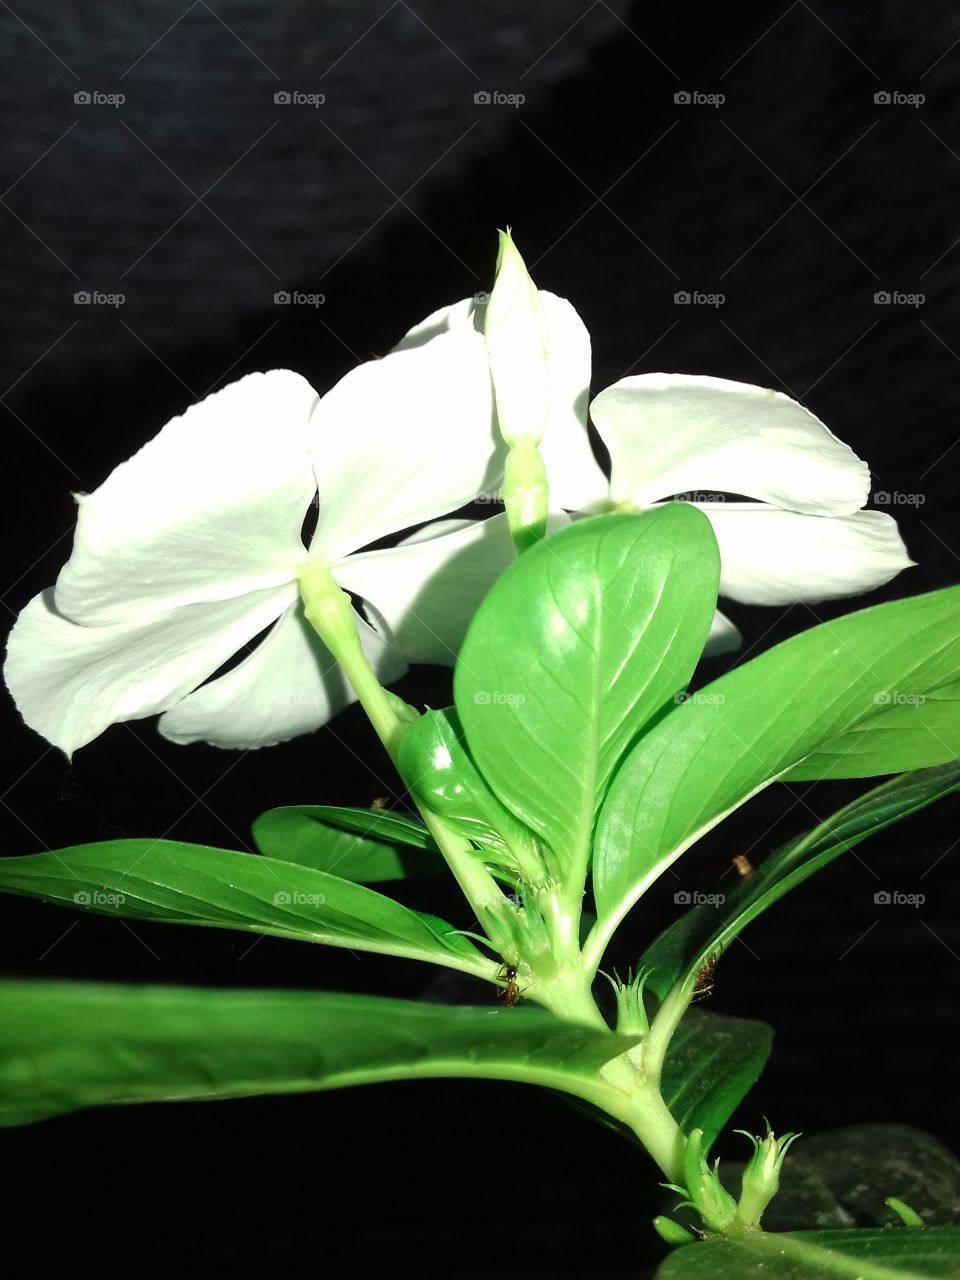 Green Leaves Fantastic White Flower Make Your Feelings As Good Thoughts Check The Flower On Two Ants